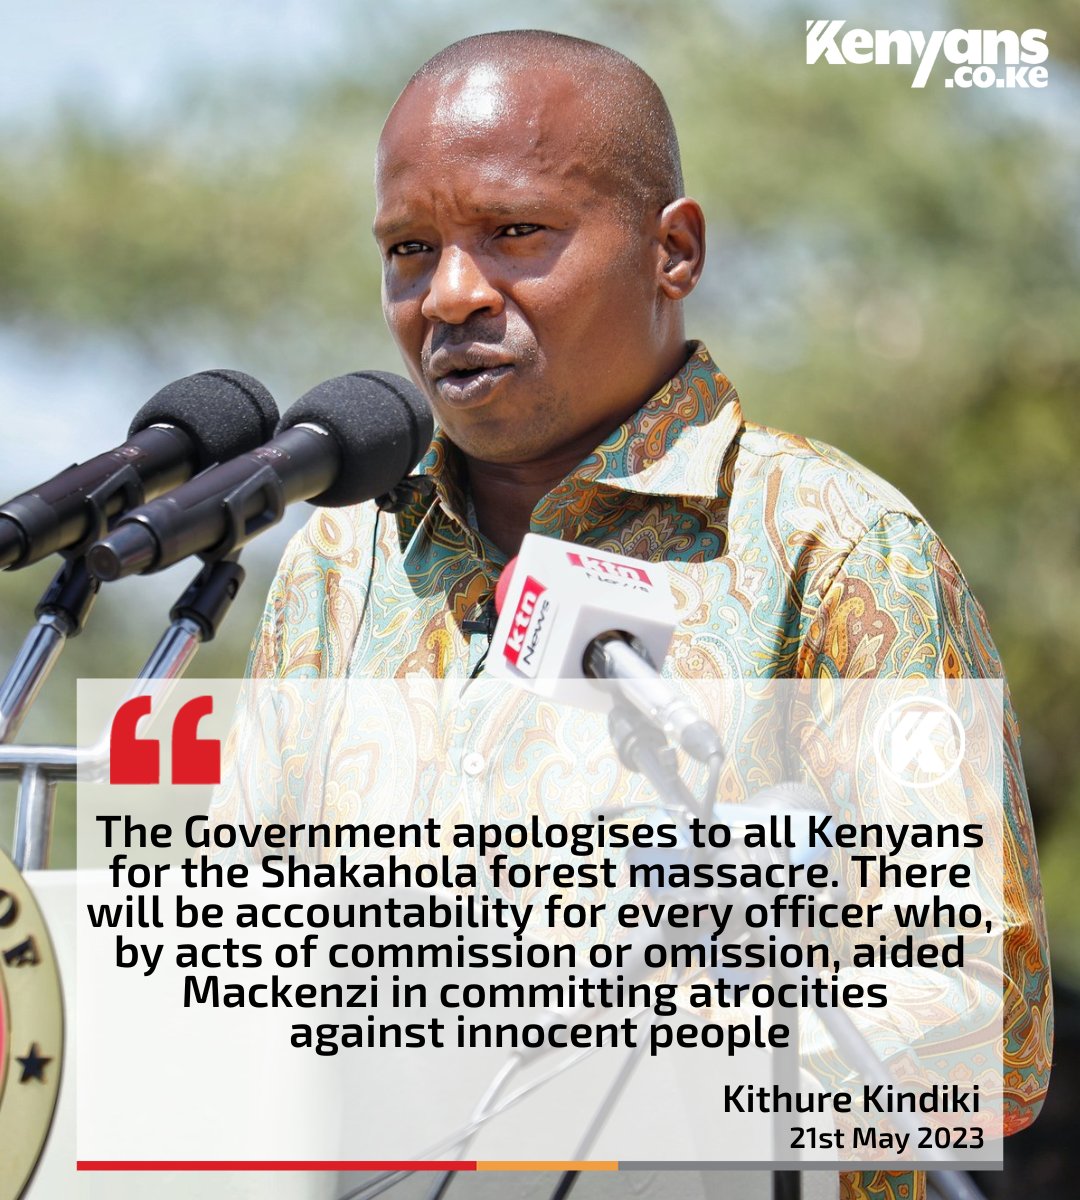 The Government apologises to all Kenyans for the Shakahola forest massacre - CS Kindiki